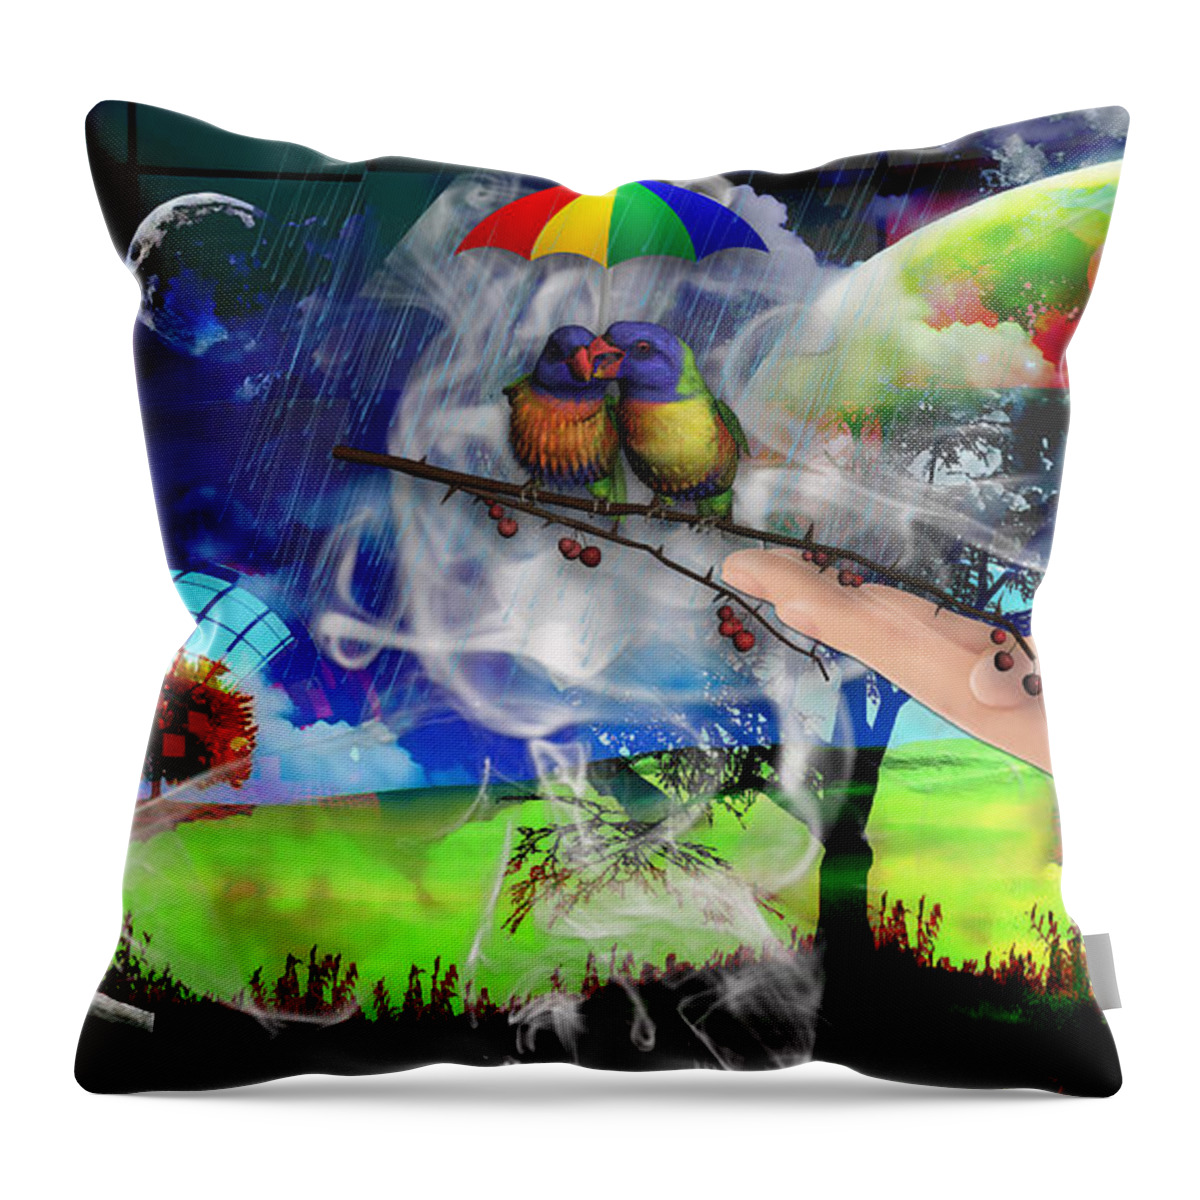 Fantasy Throw Pillow featuring the mixed media If You Want More Love Just Say So by Marvin Blaine